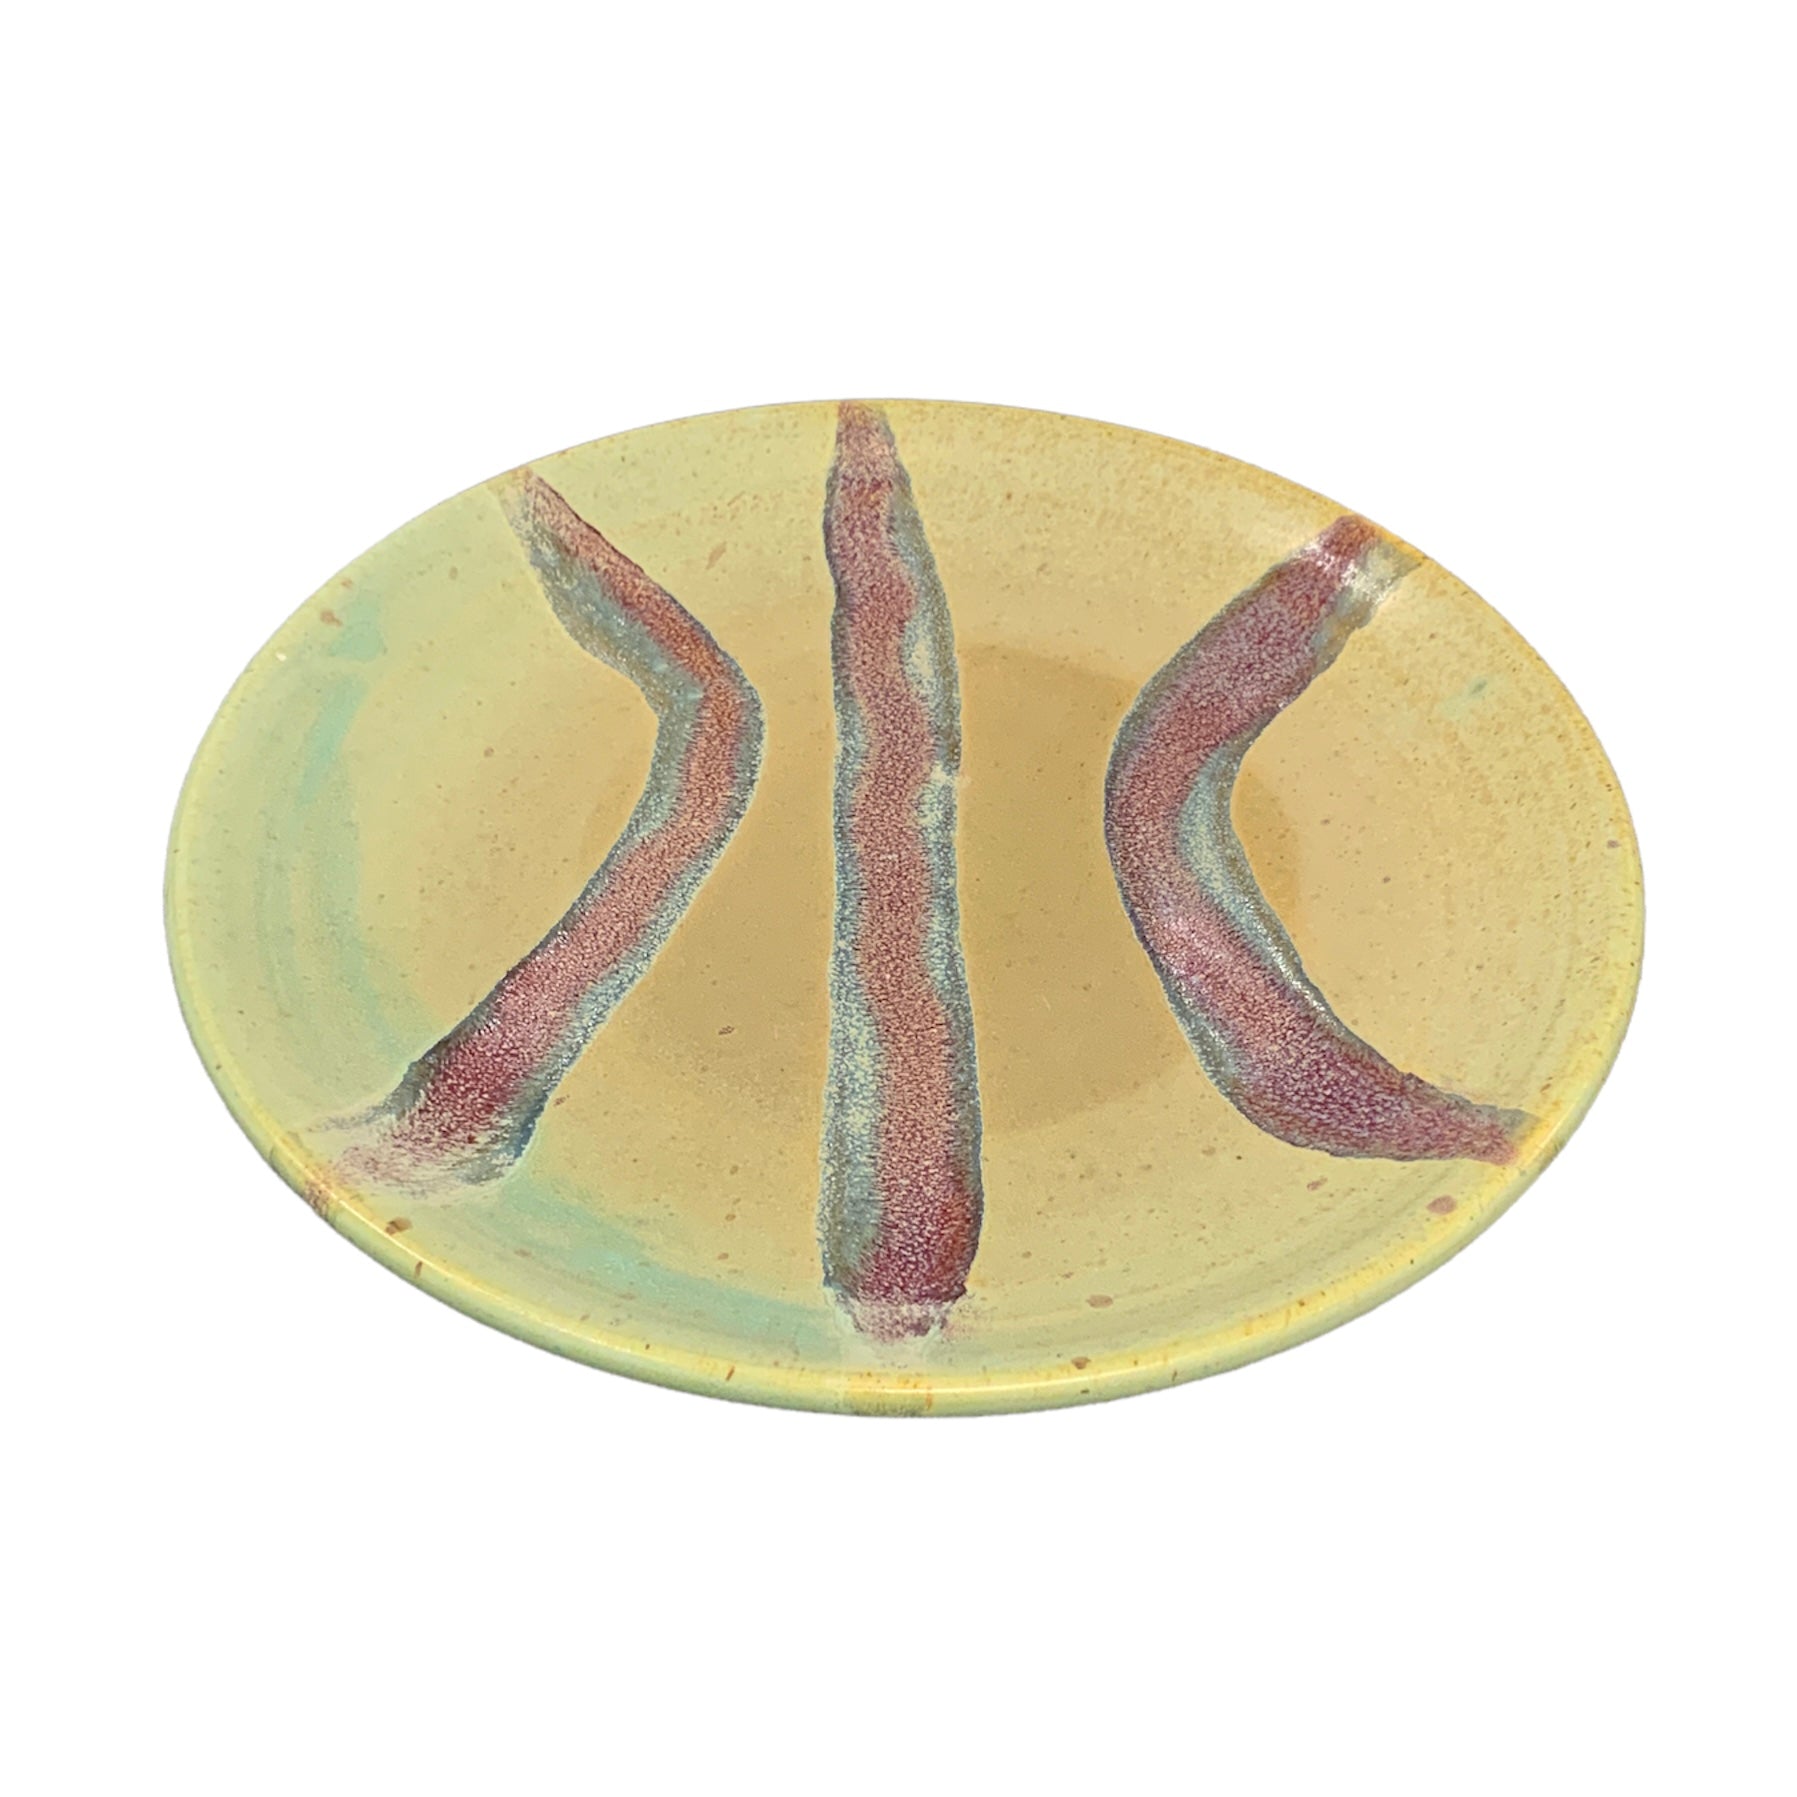 LARGE PLATE - ABSTRACT PISTACHIO & MAROON